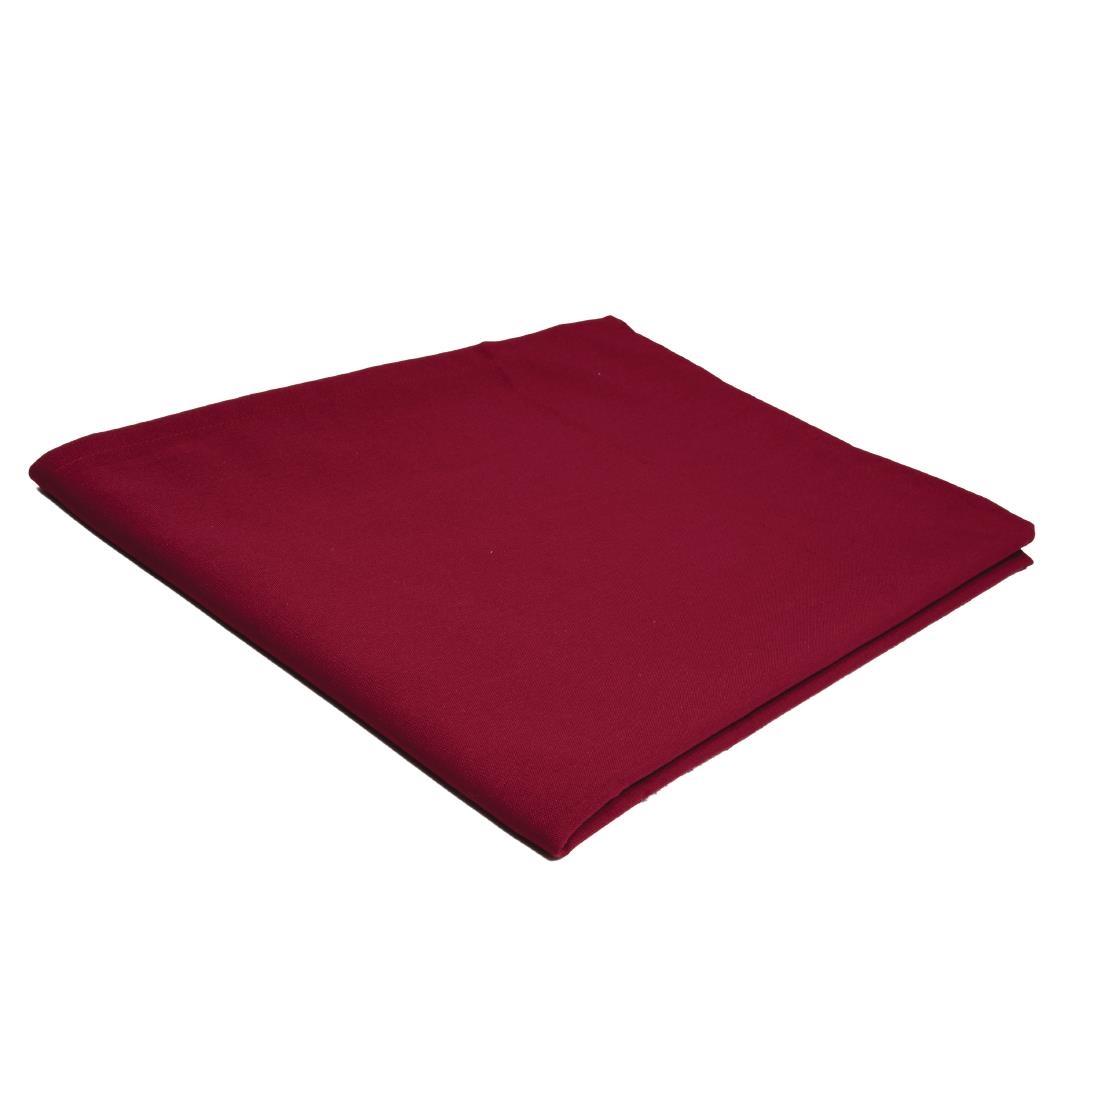 Occasions Tablecloth Burgundy 2290 x 2290mm - HB570  - 3